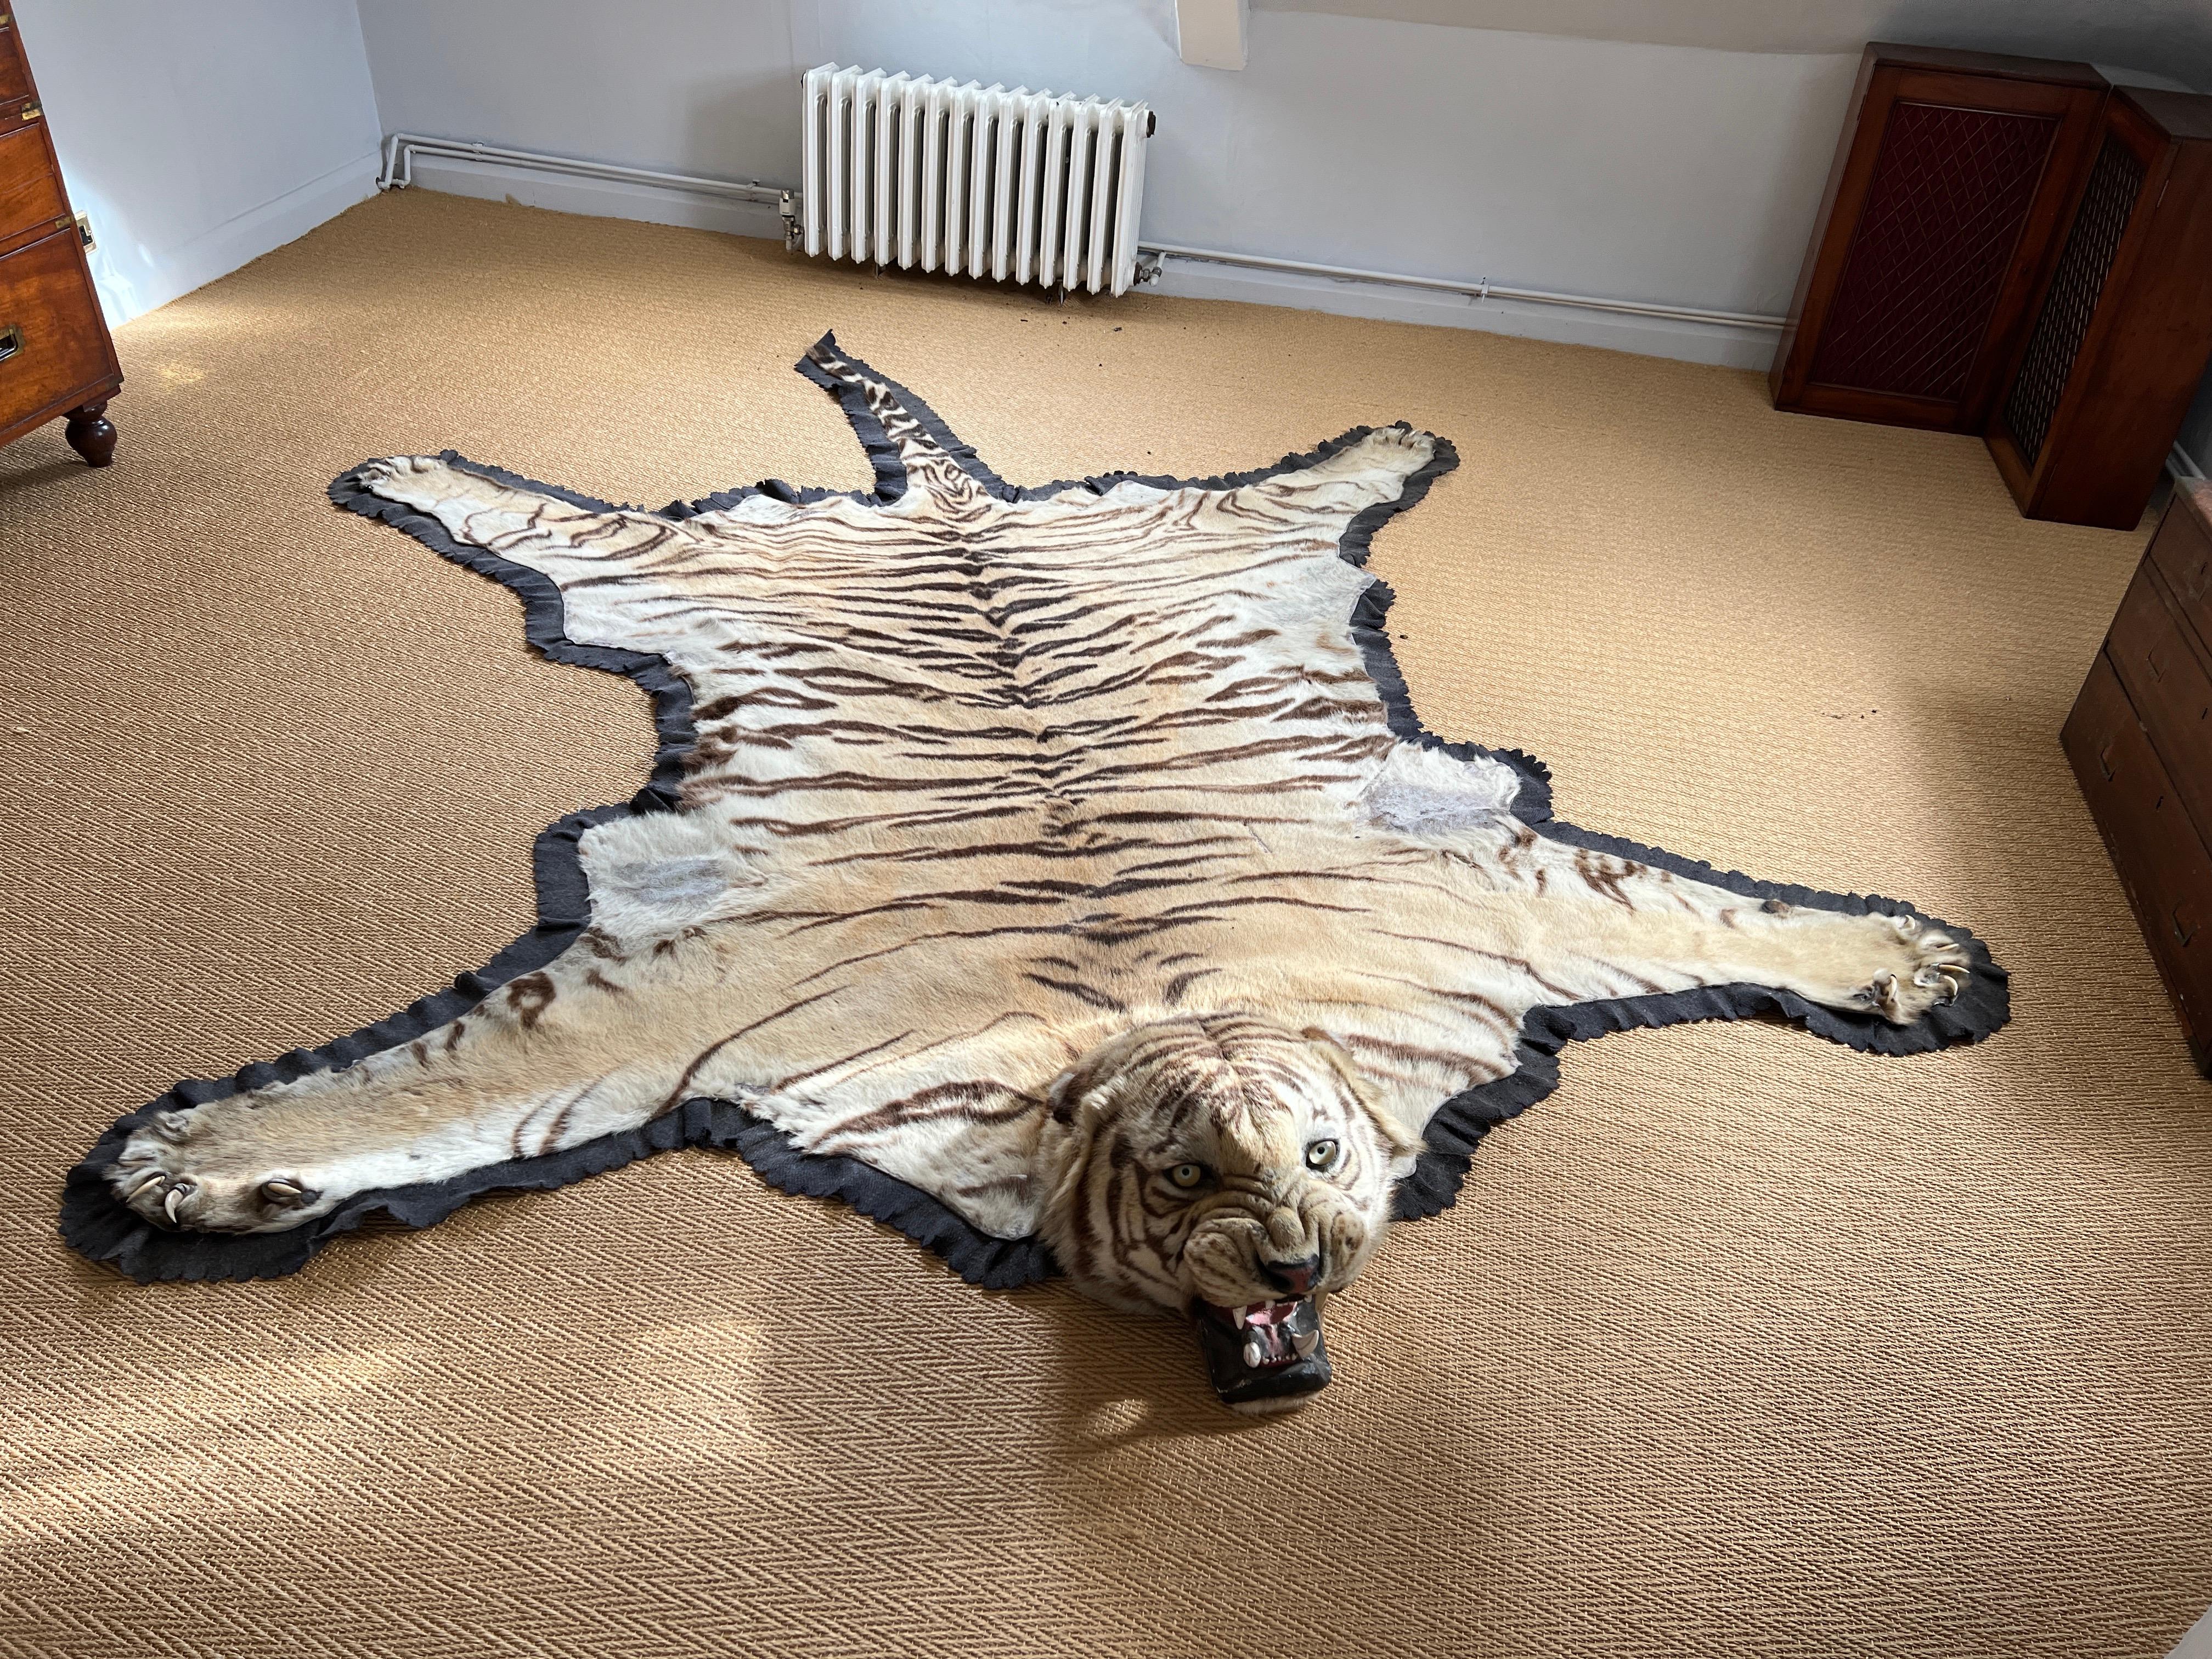 This tiger skin rug was mounted by Van Ingen & Van Ingen, a famous firm of taxidermists in Mysore, India. Measuring over 3 meters head to tail and across the forelimbs 220cm makes this specimen the largest we can find any record of. The condition is